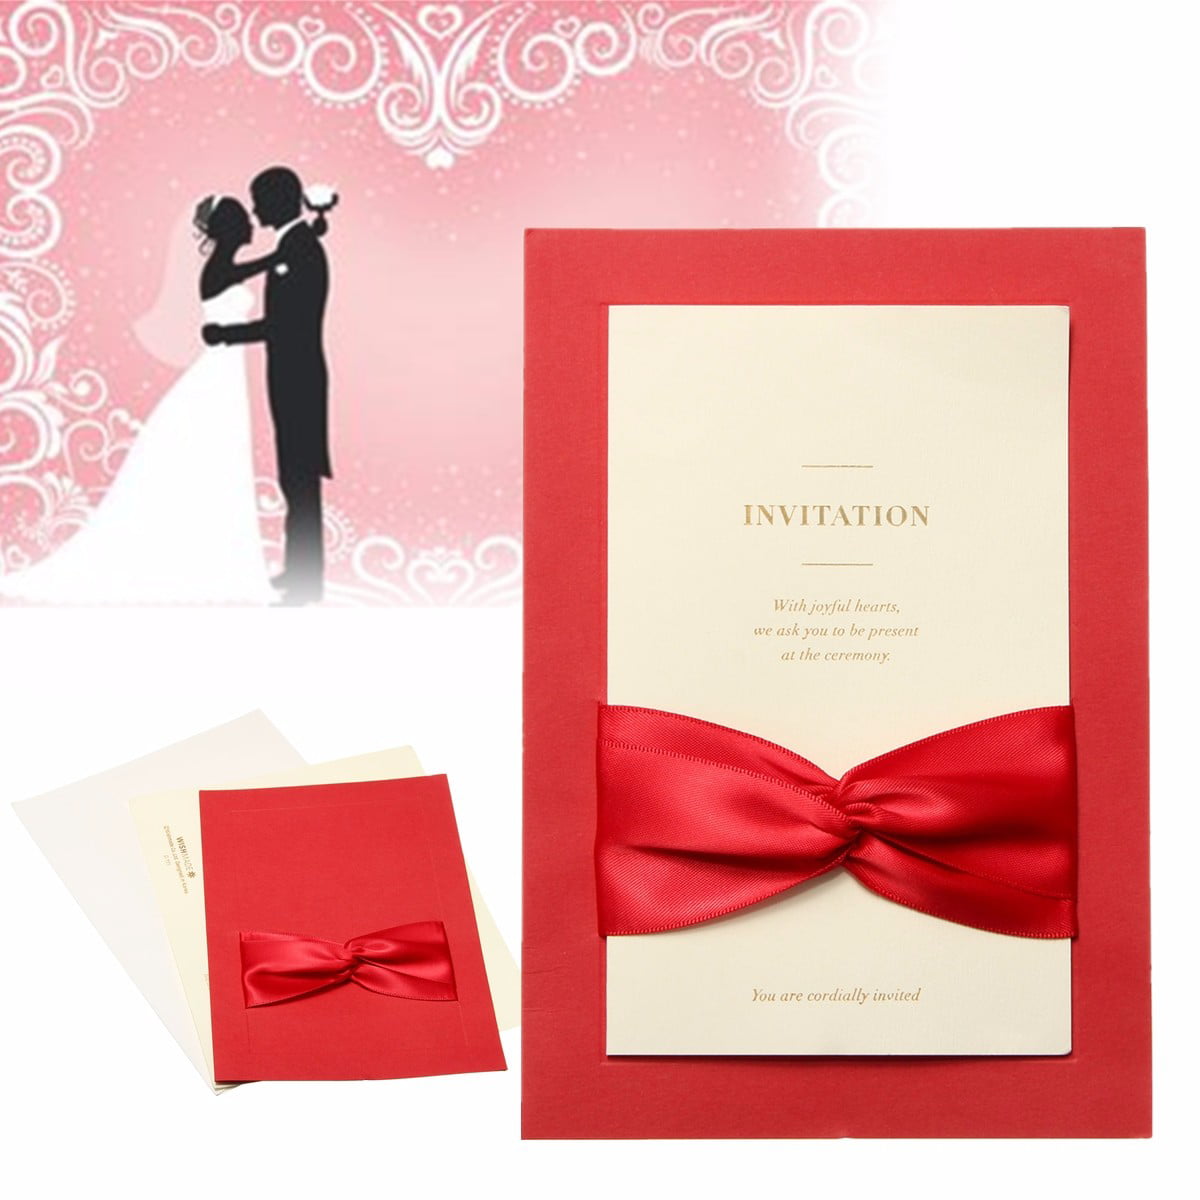 Wedding Invitation Cards Kit With Envelopes, Seals,Welcome Words